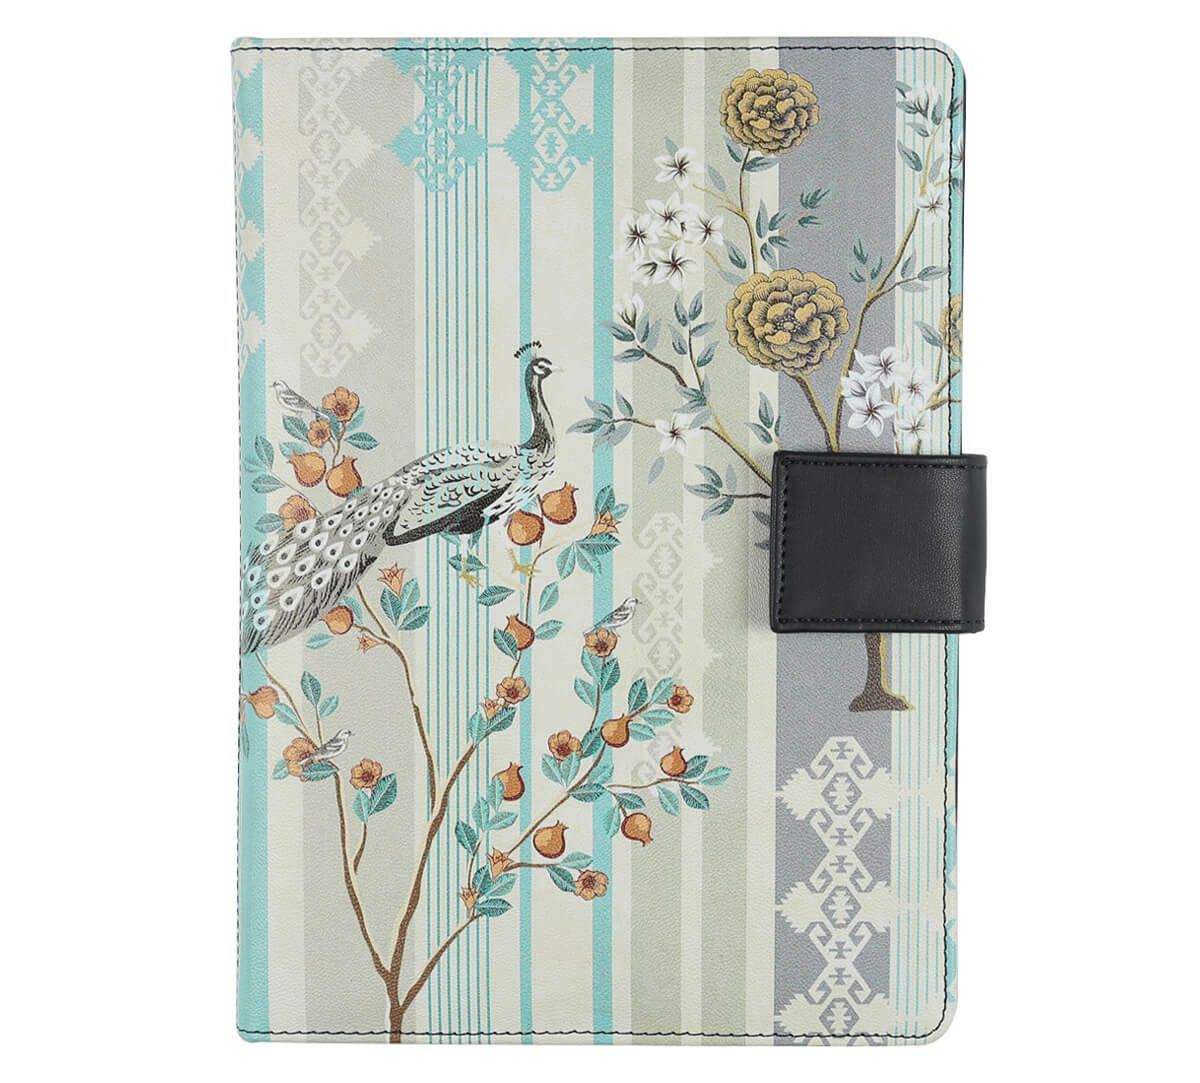 India Circus Peafowl Eclipse Notebook Planner